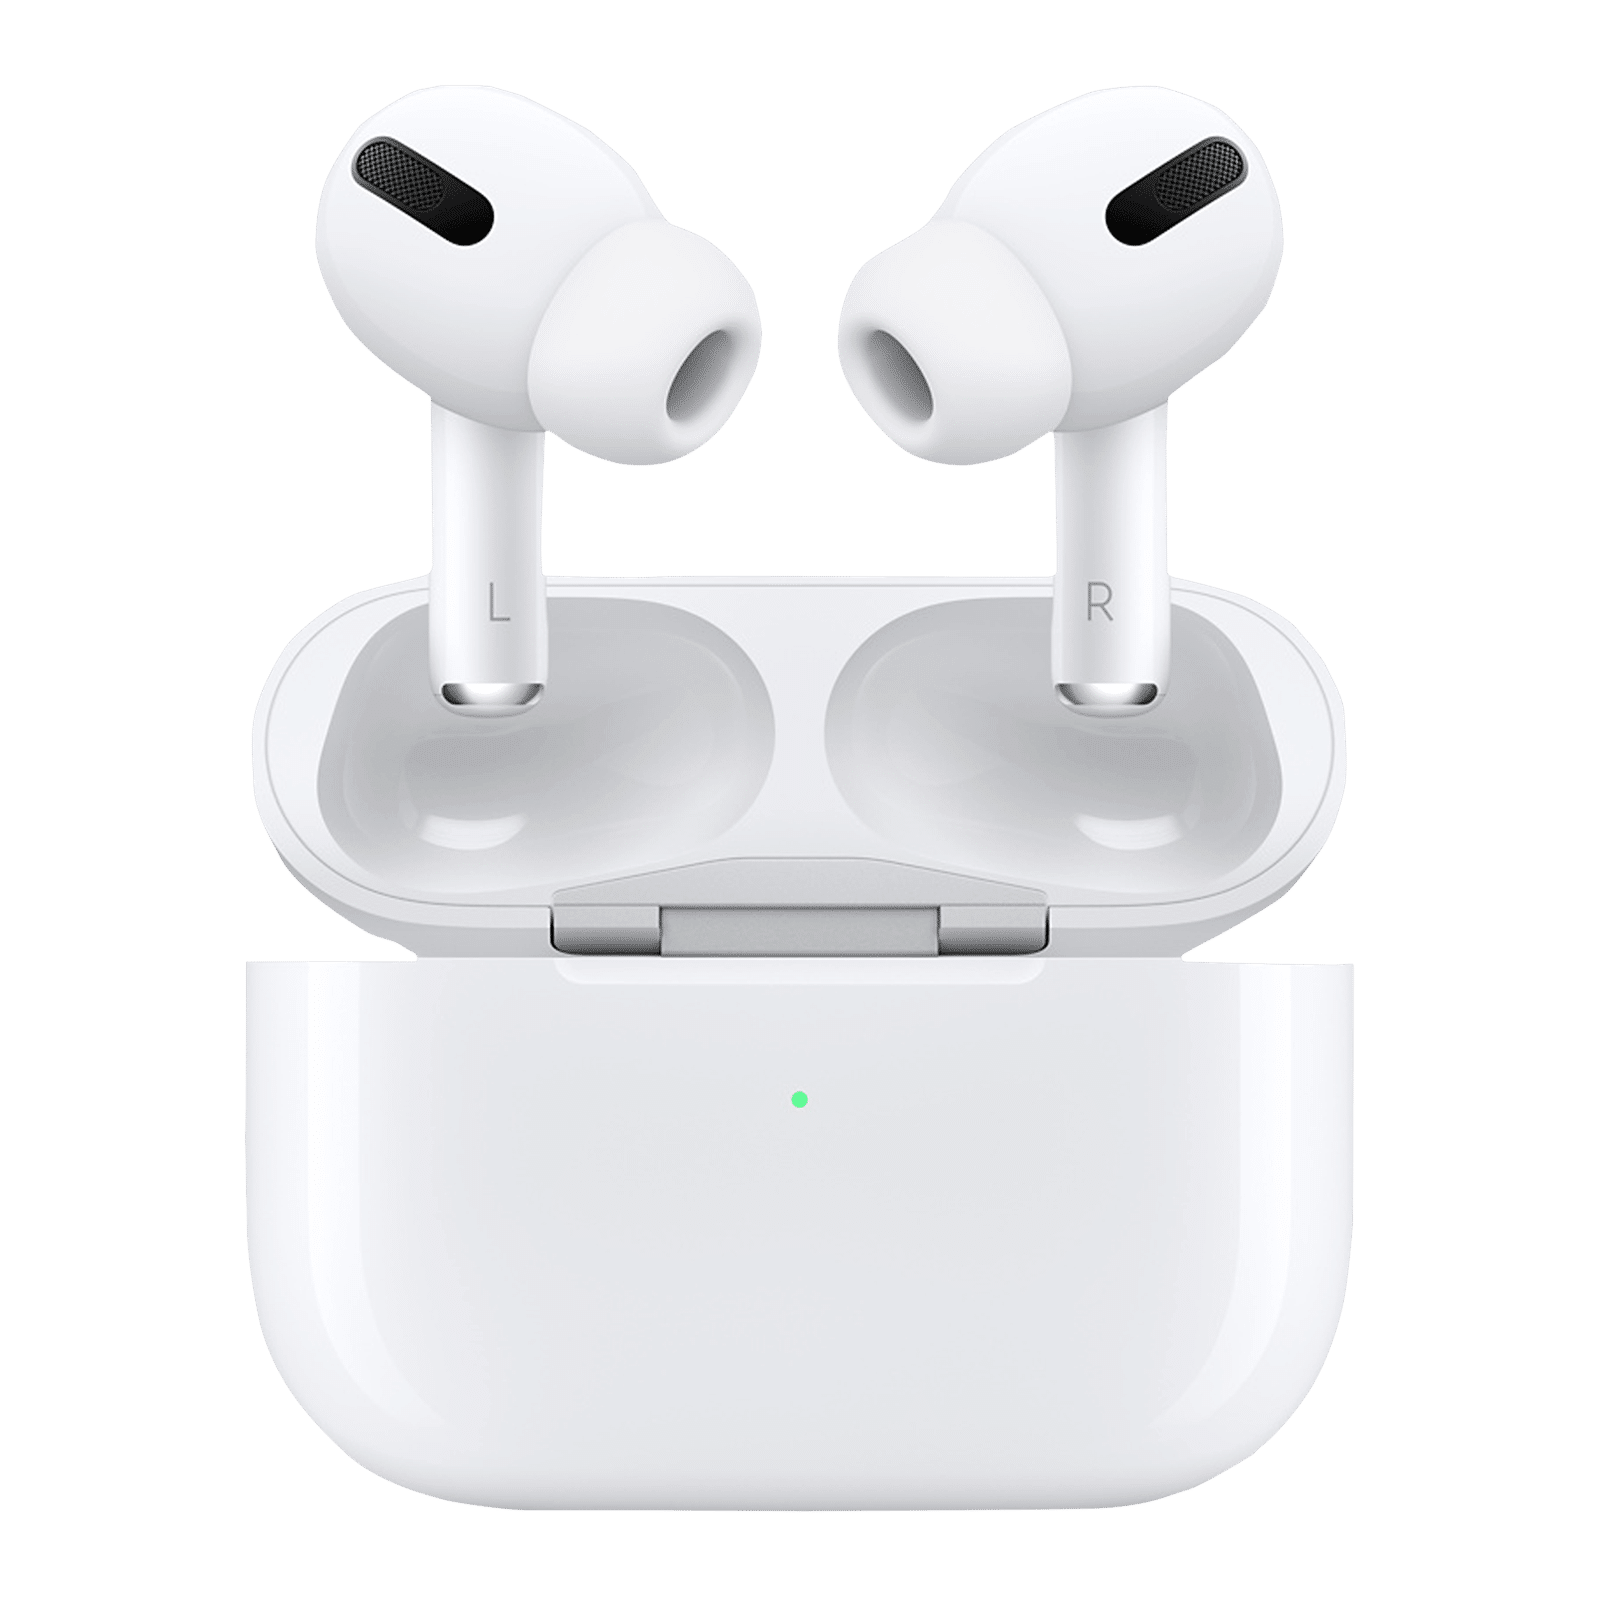 Buy Apple AirPods Pro (1st Generation) with MagSafe Charging Case 